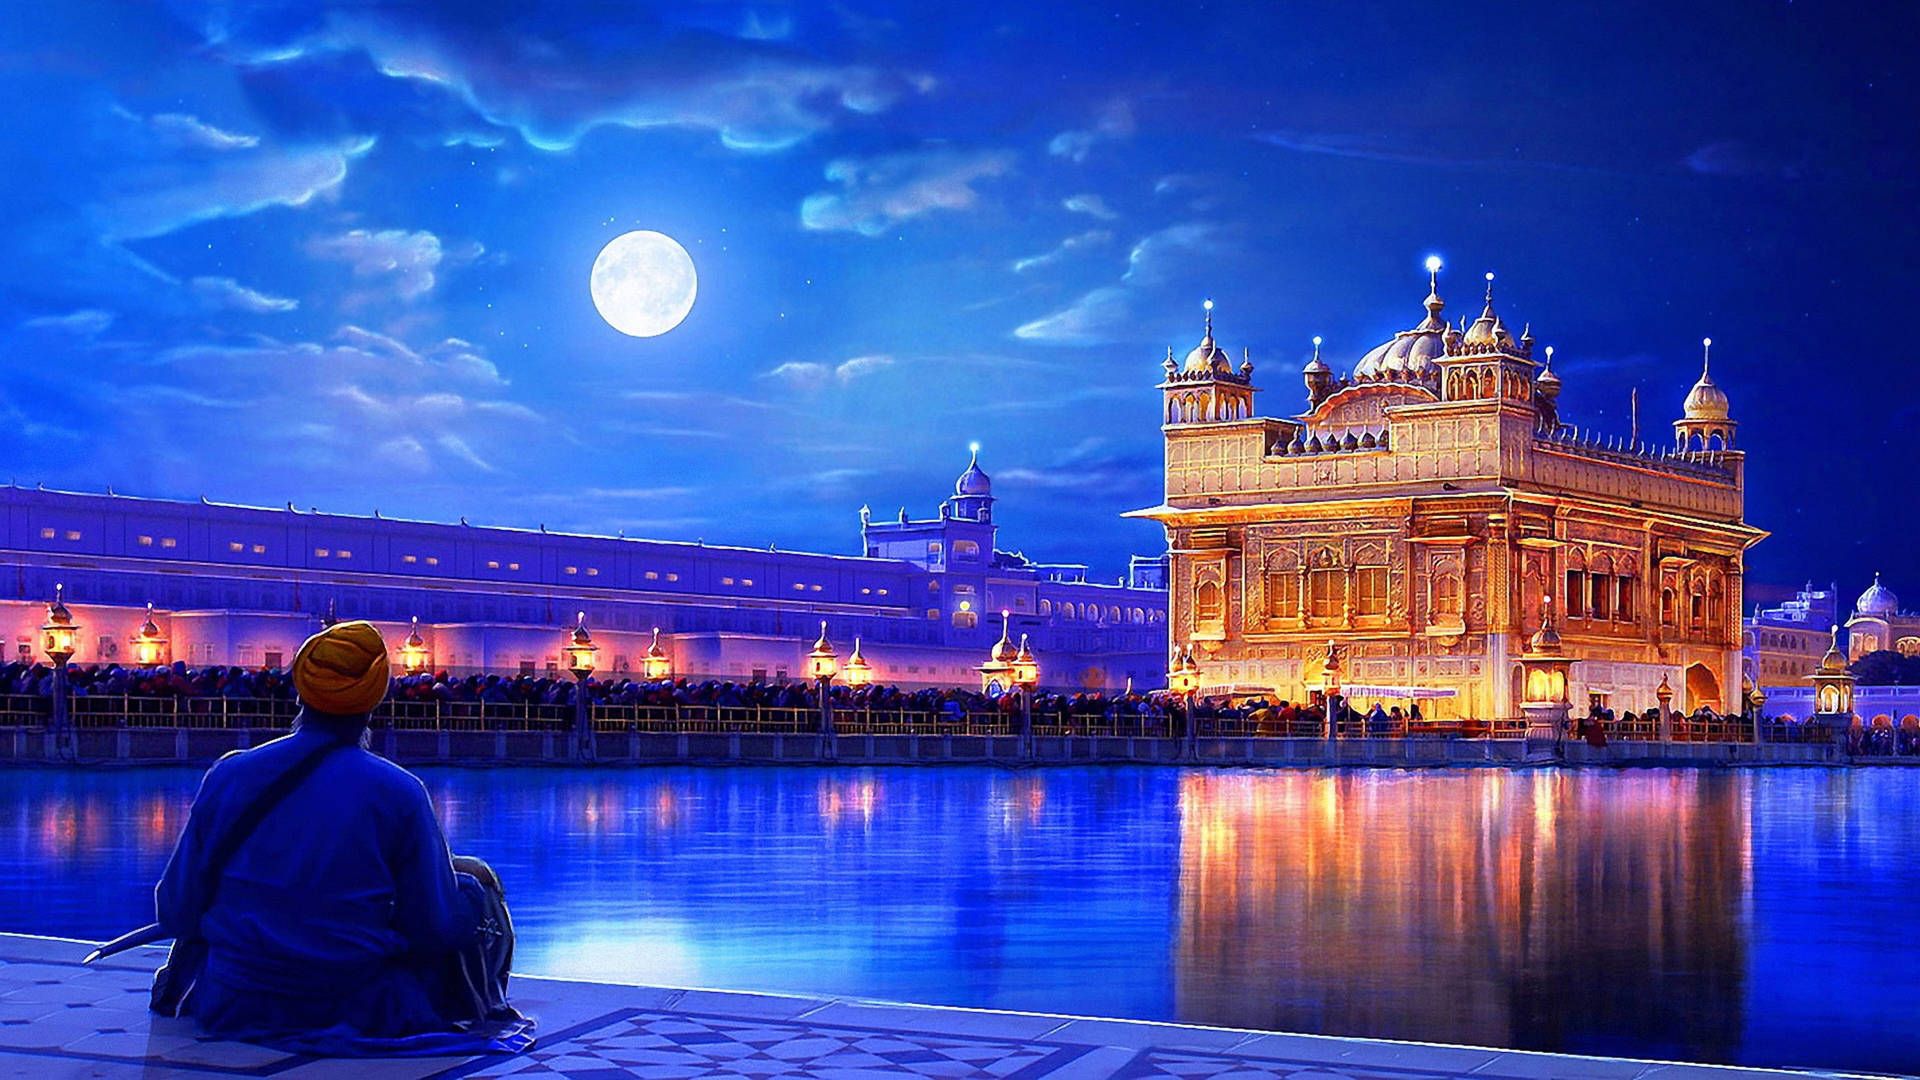 Golden Temple In Punjab India Background